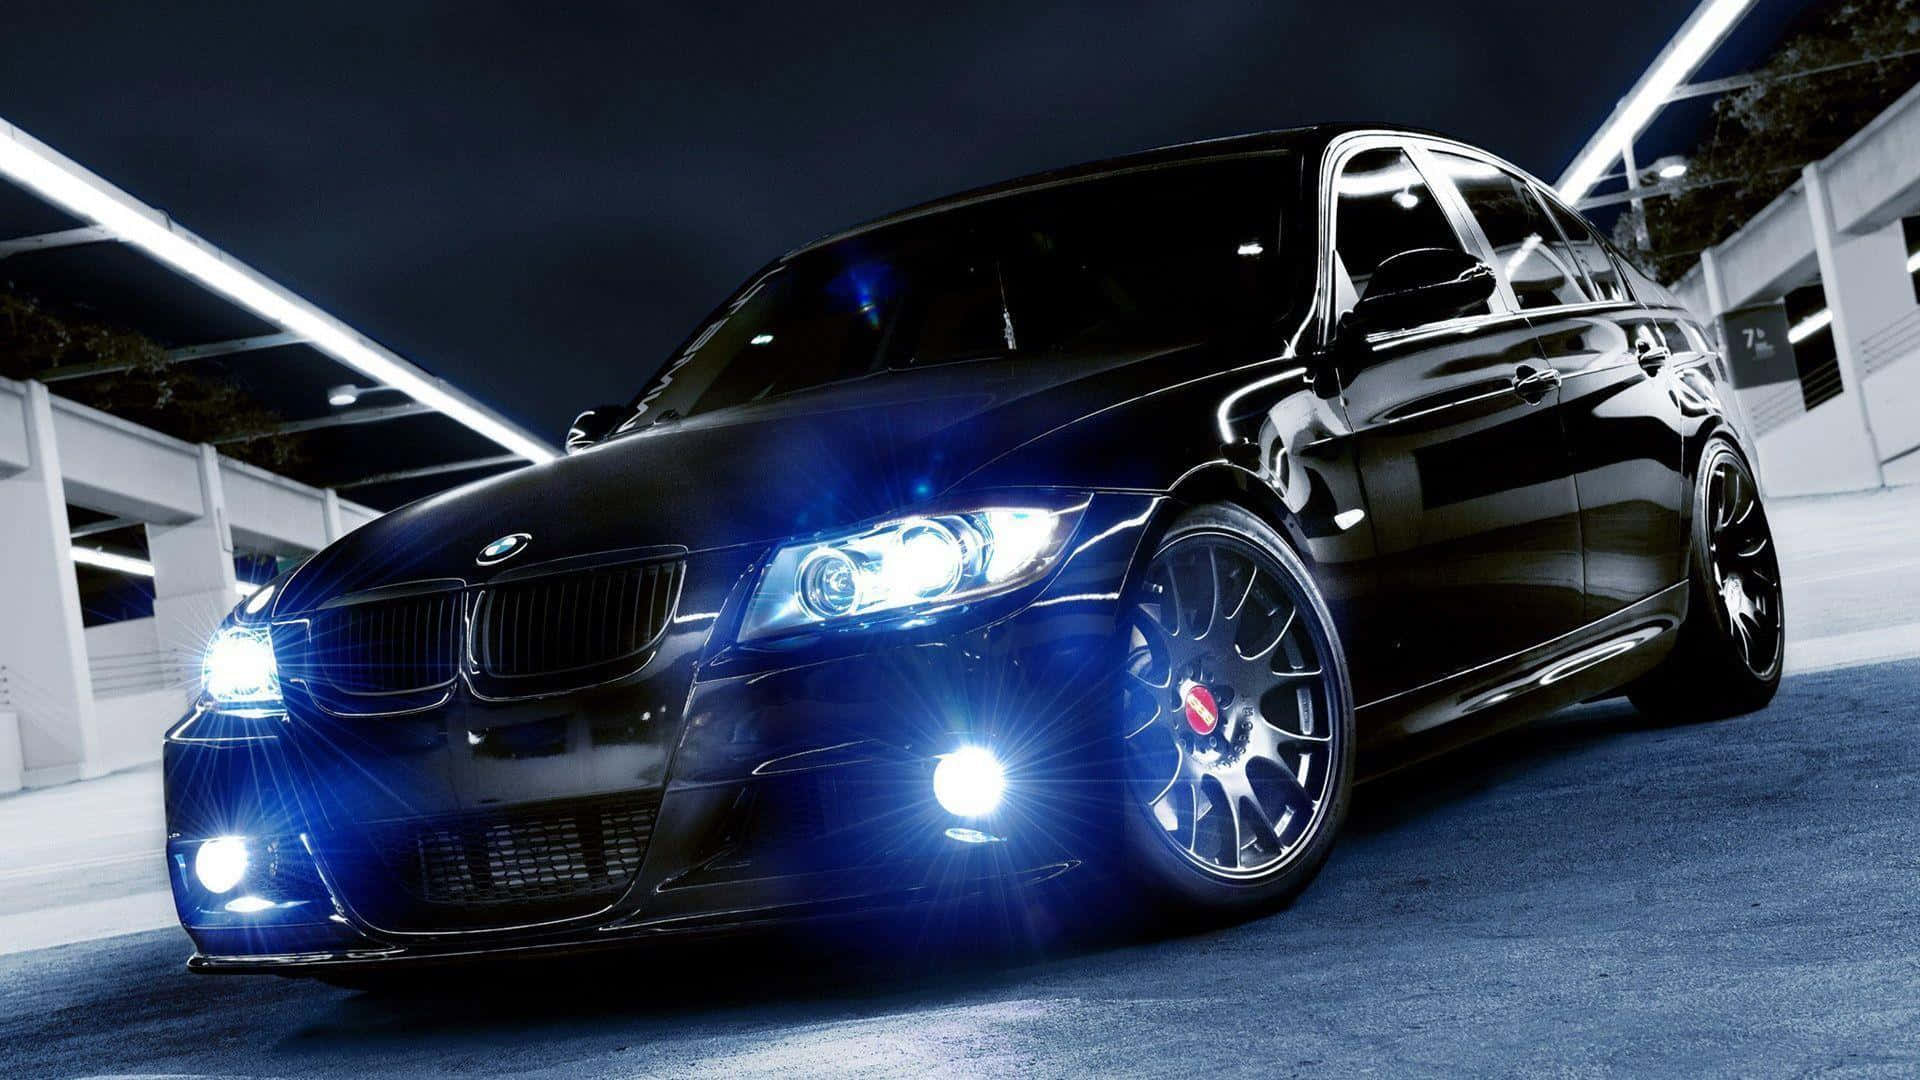 Get Ready for a Cool Ride in this BMW Wallpaper